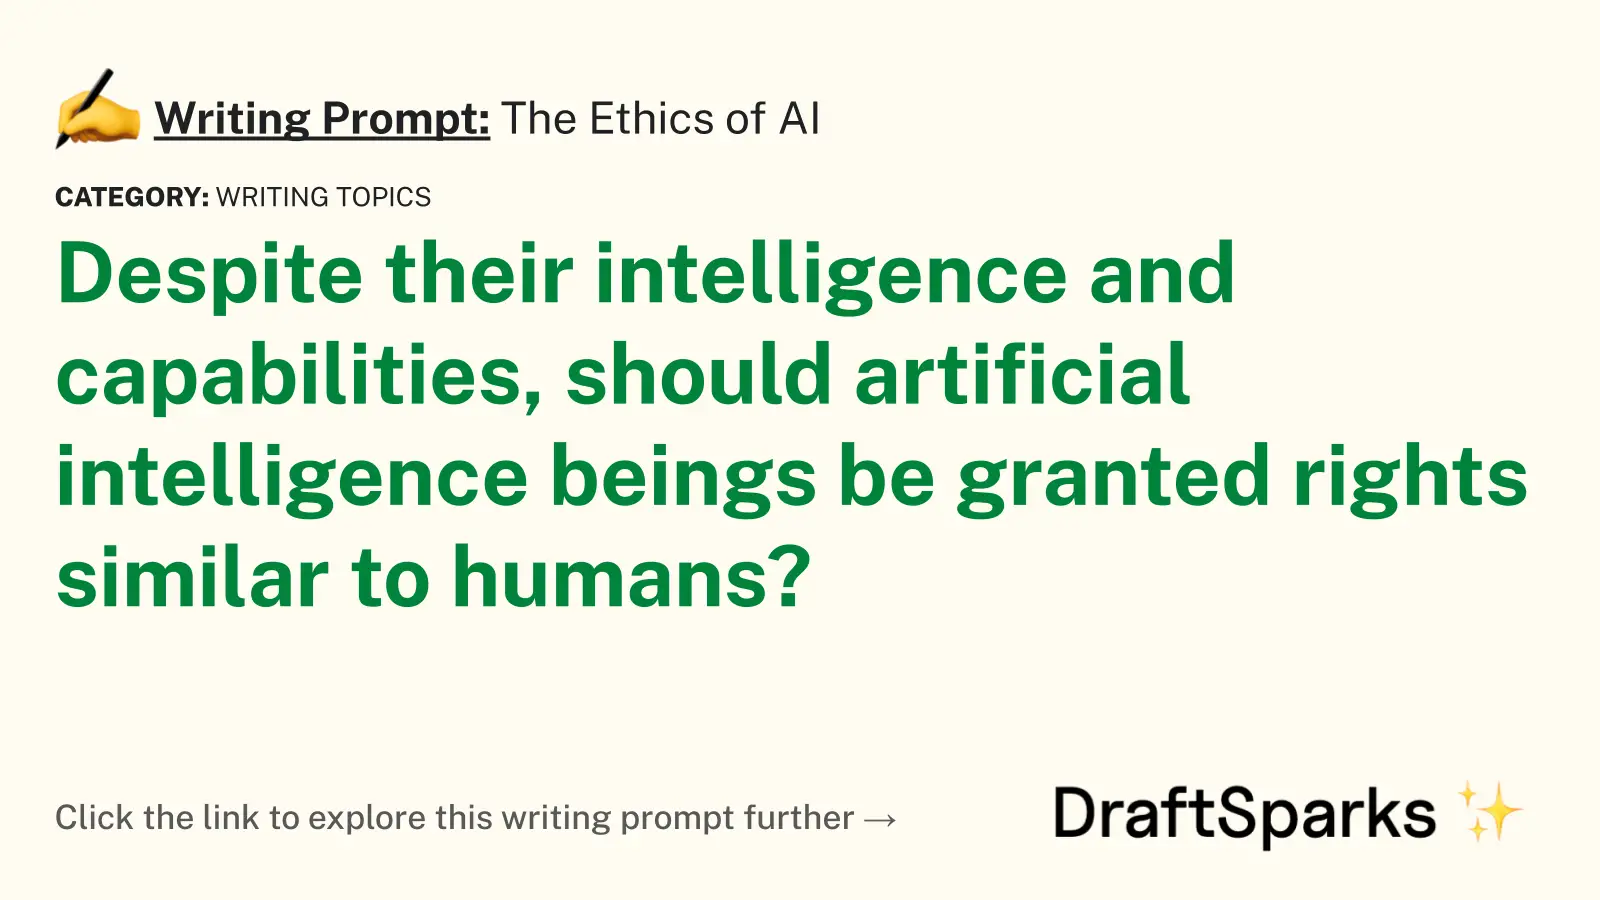 The Ethics of AI